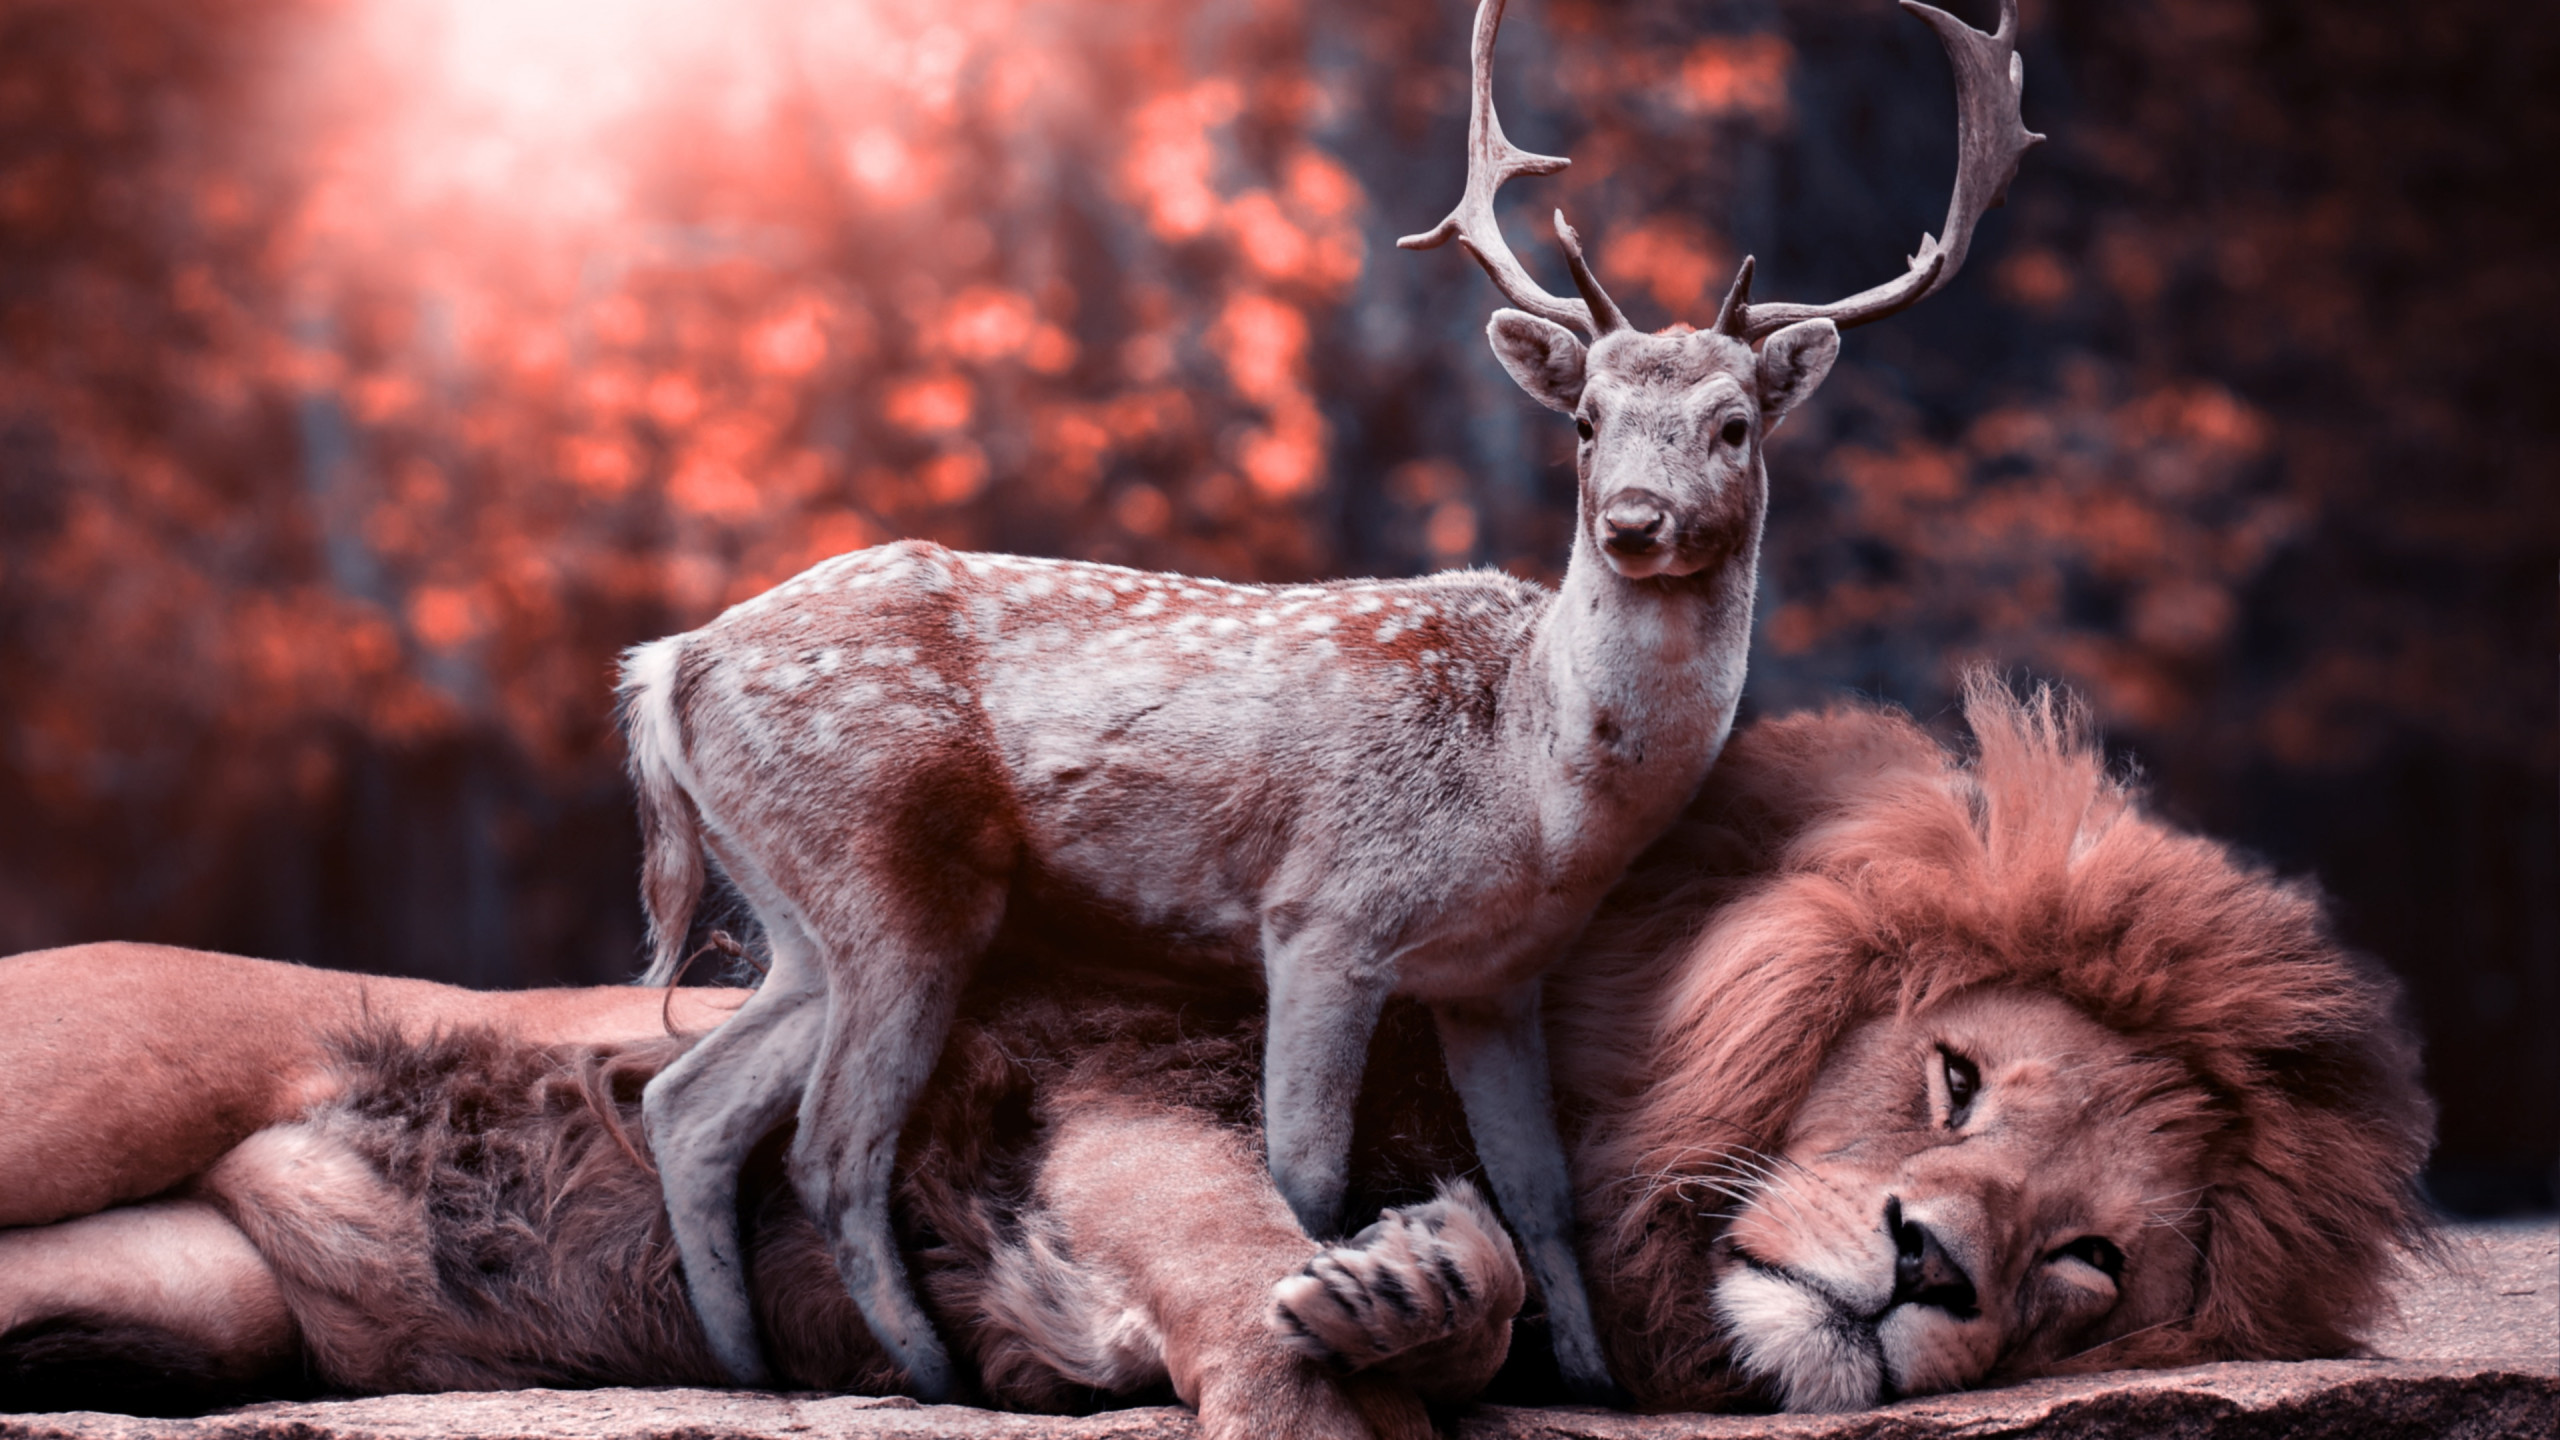 The lion and the deer wallpaper 2560x1440